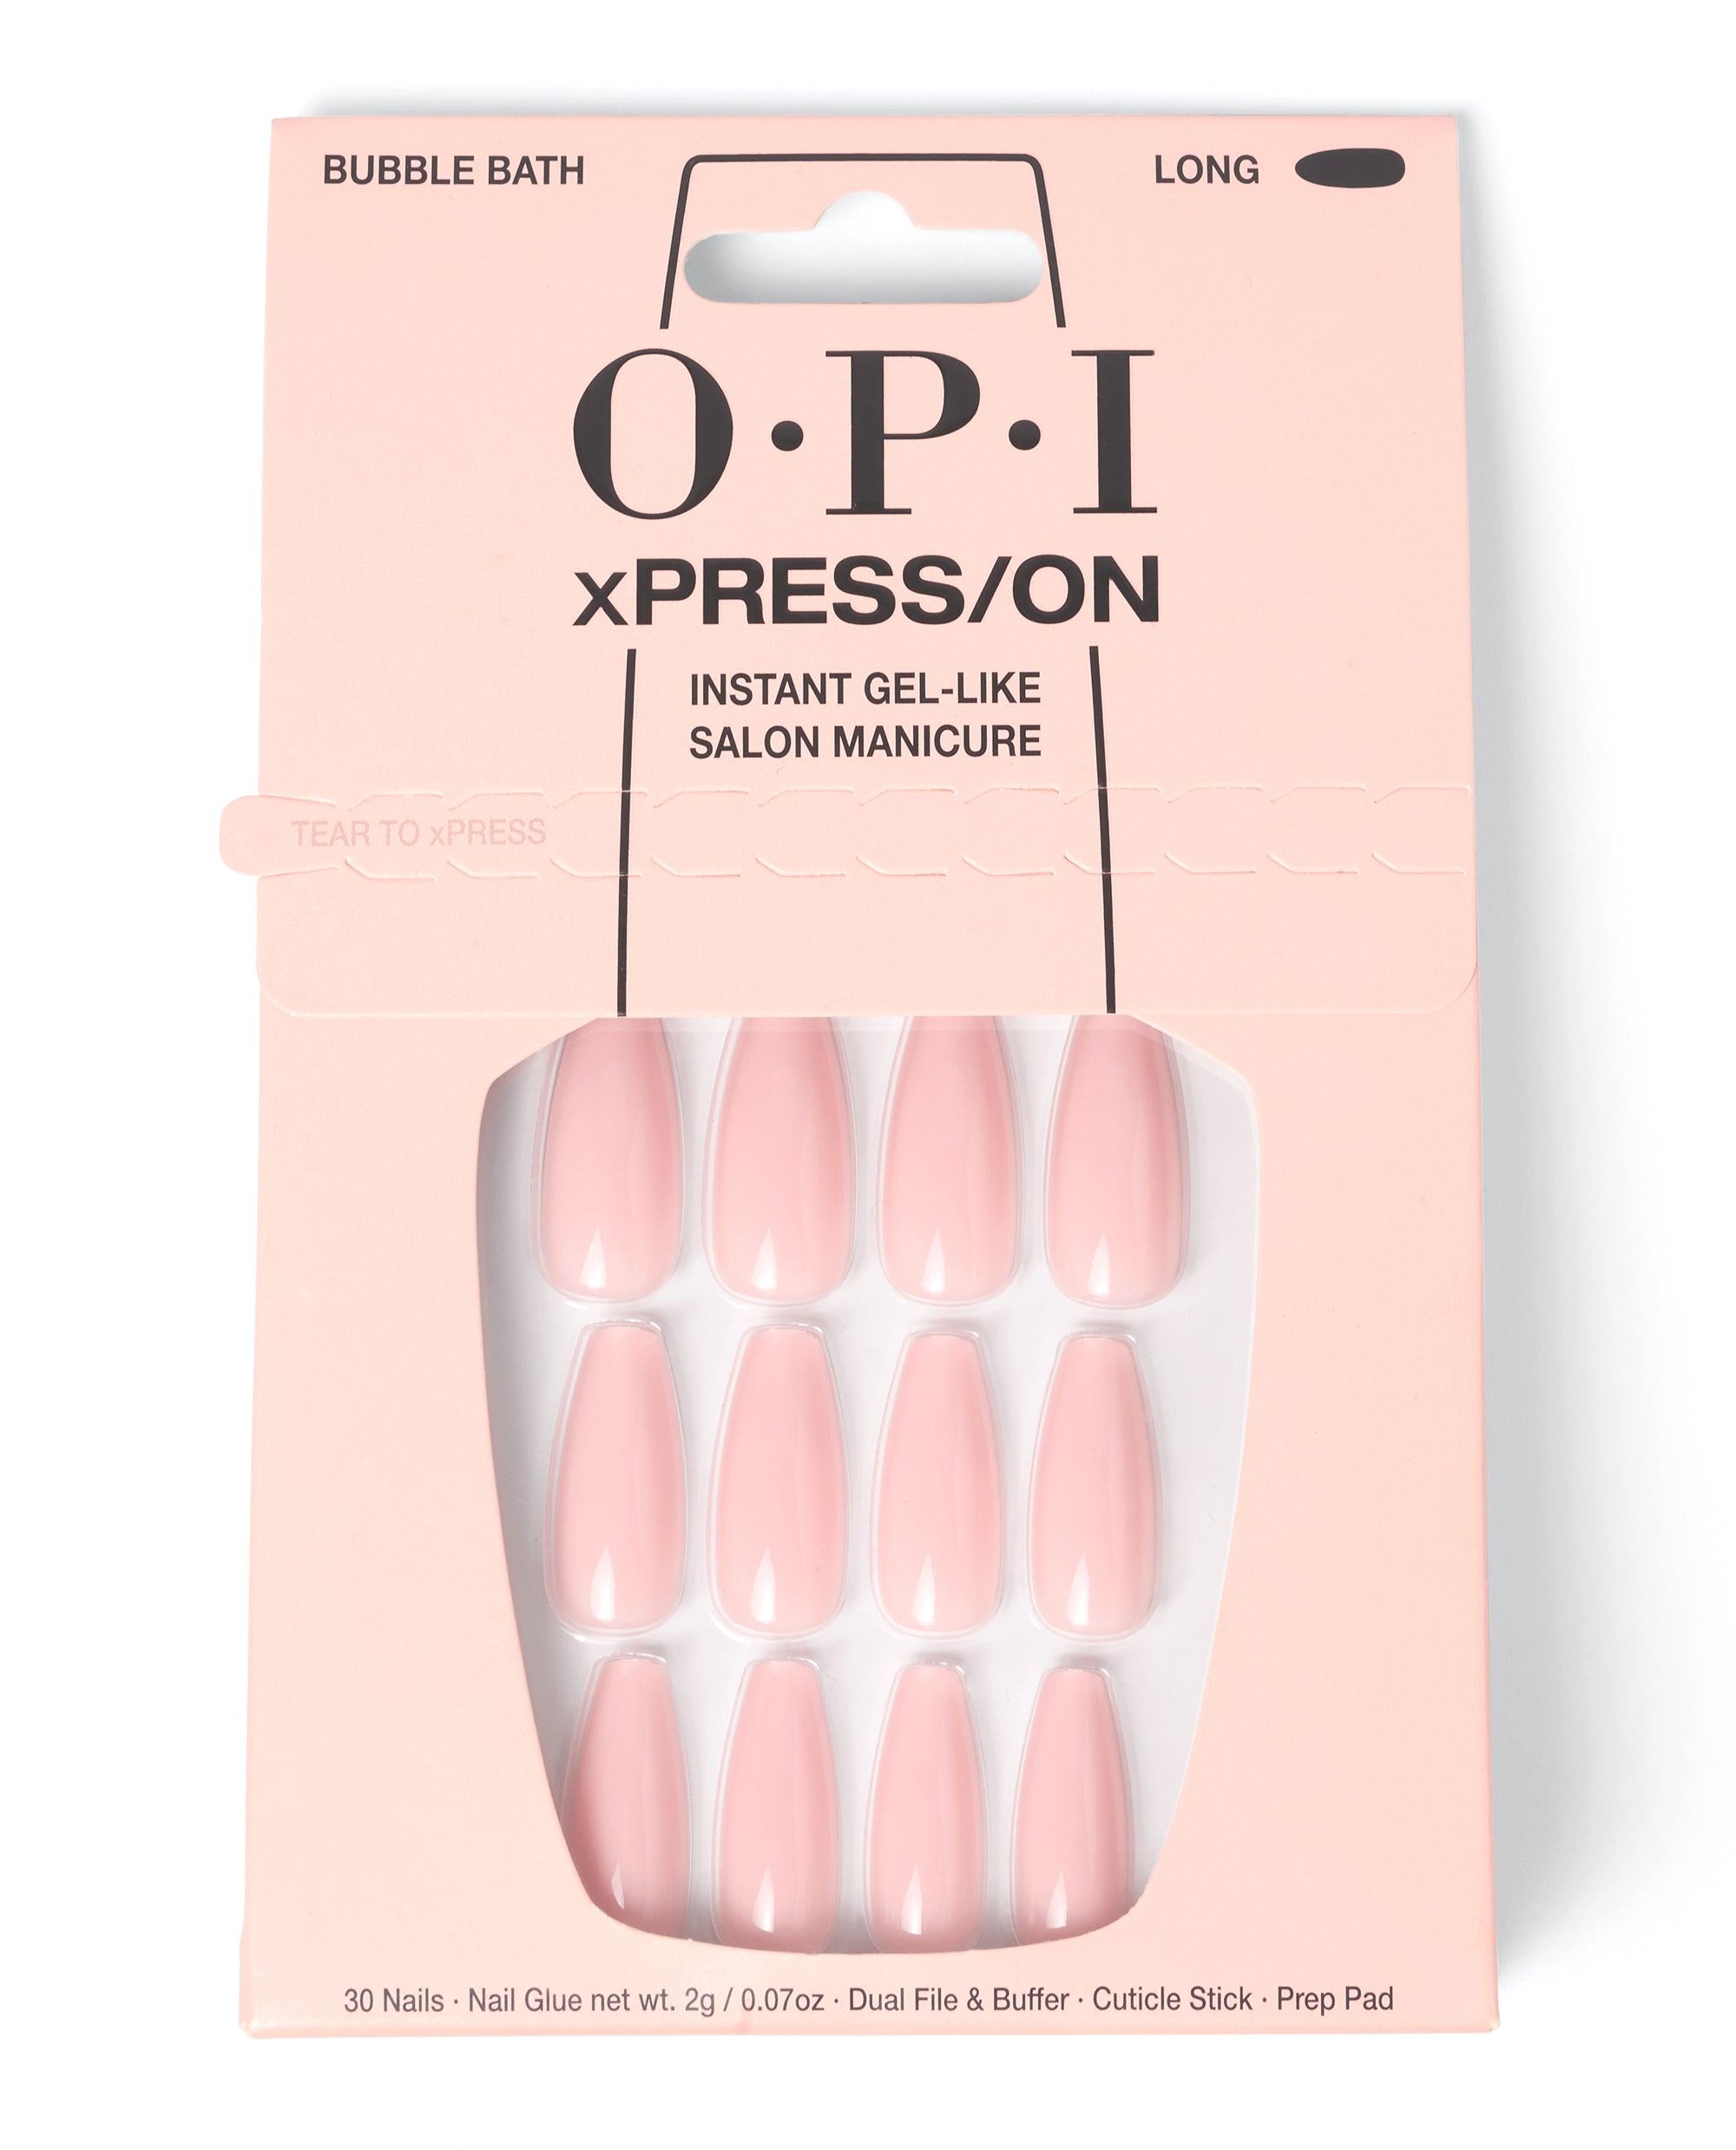 Bubble Bath® - Nude Candy Pink Press-on Nails | OPI